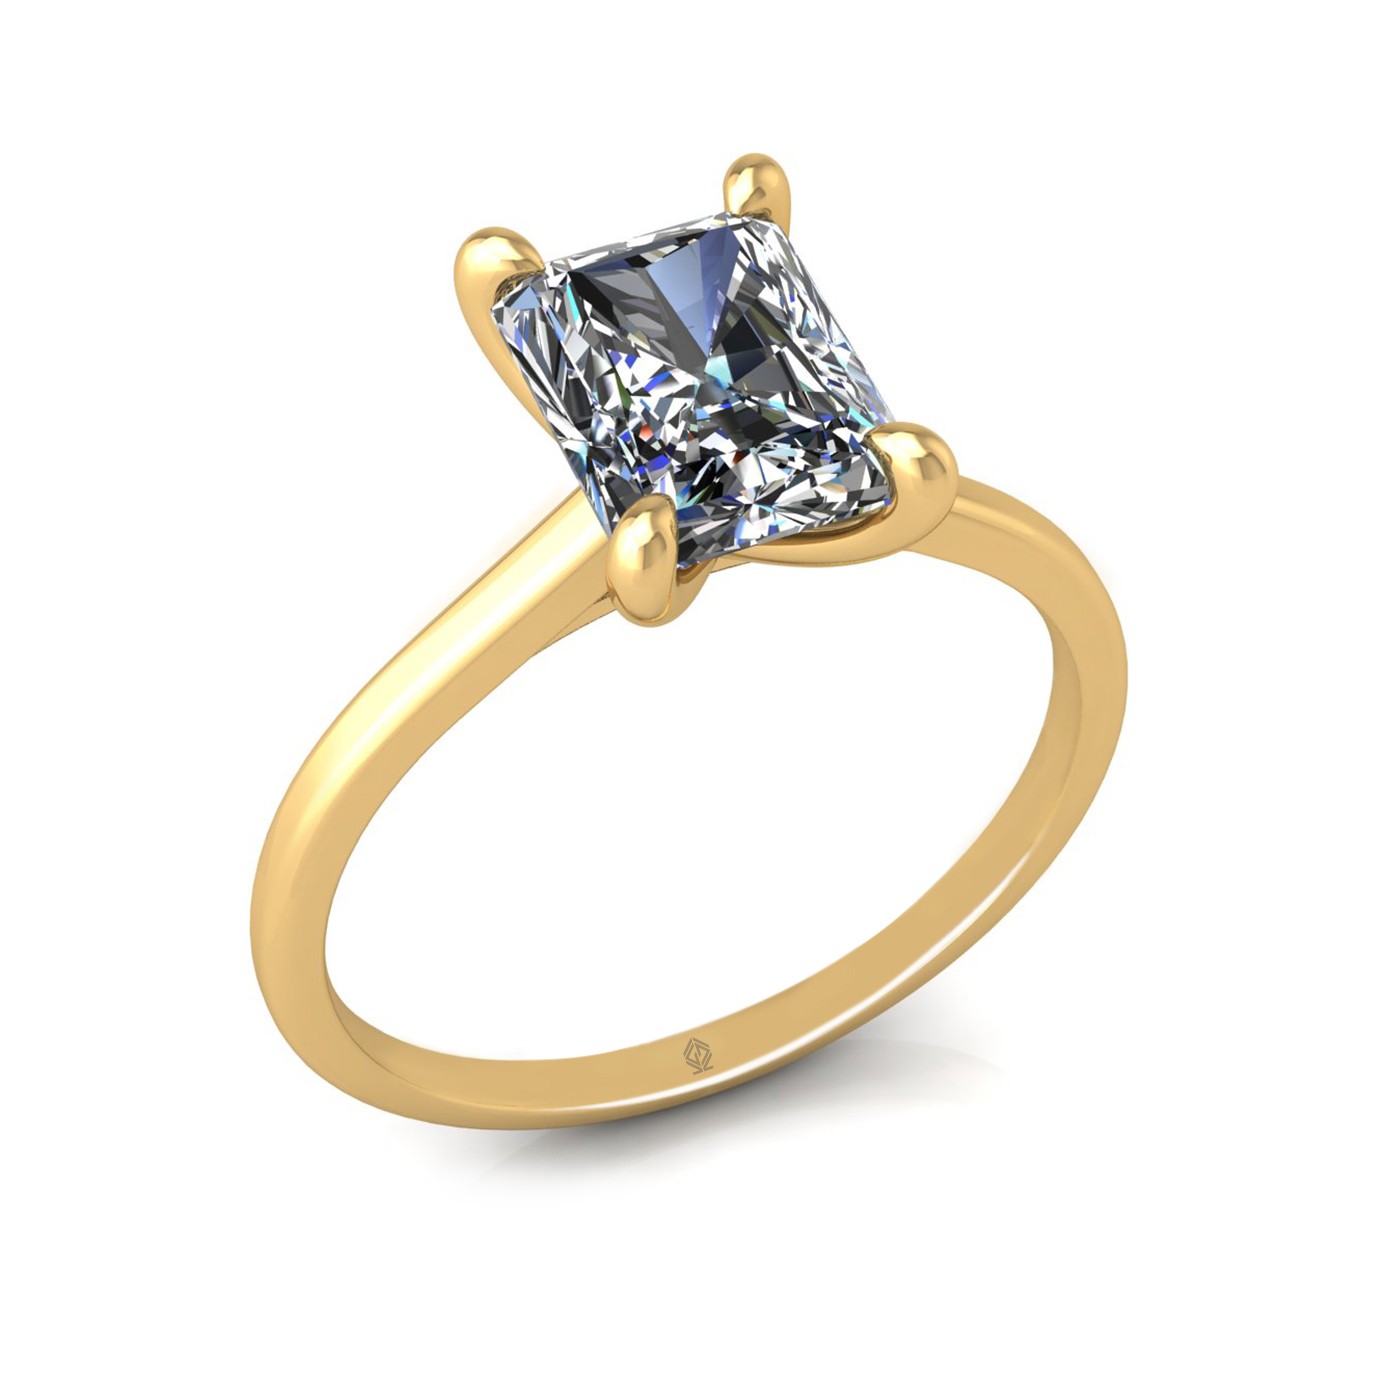 18k yellow gold  2,00 ct 4 prongs solitaire radiant cut diamond engagement ring with whisper thin band